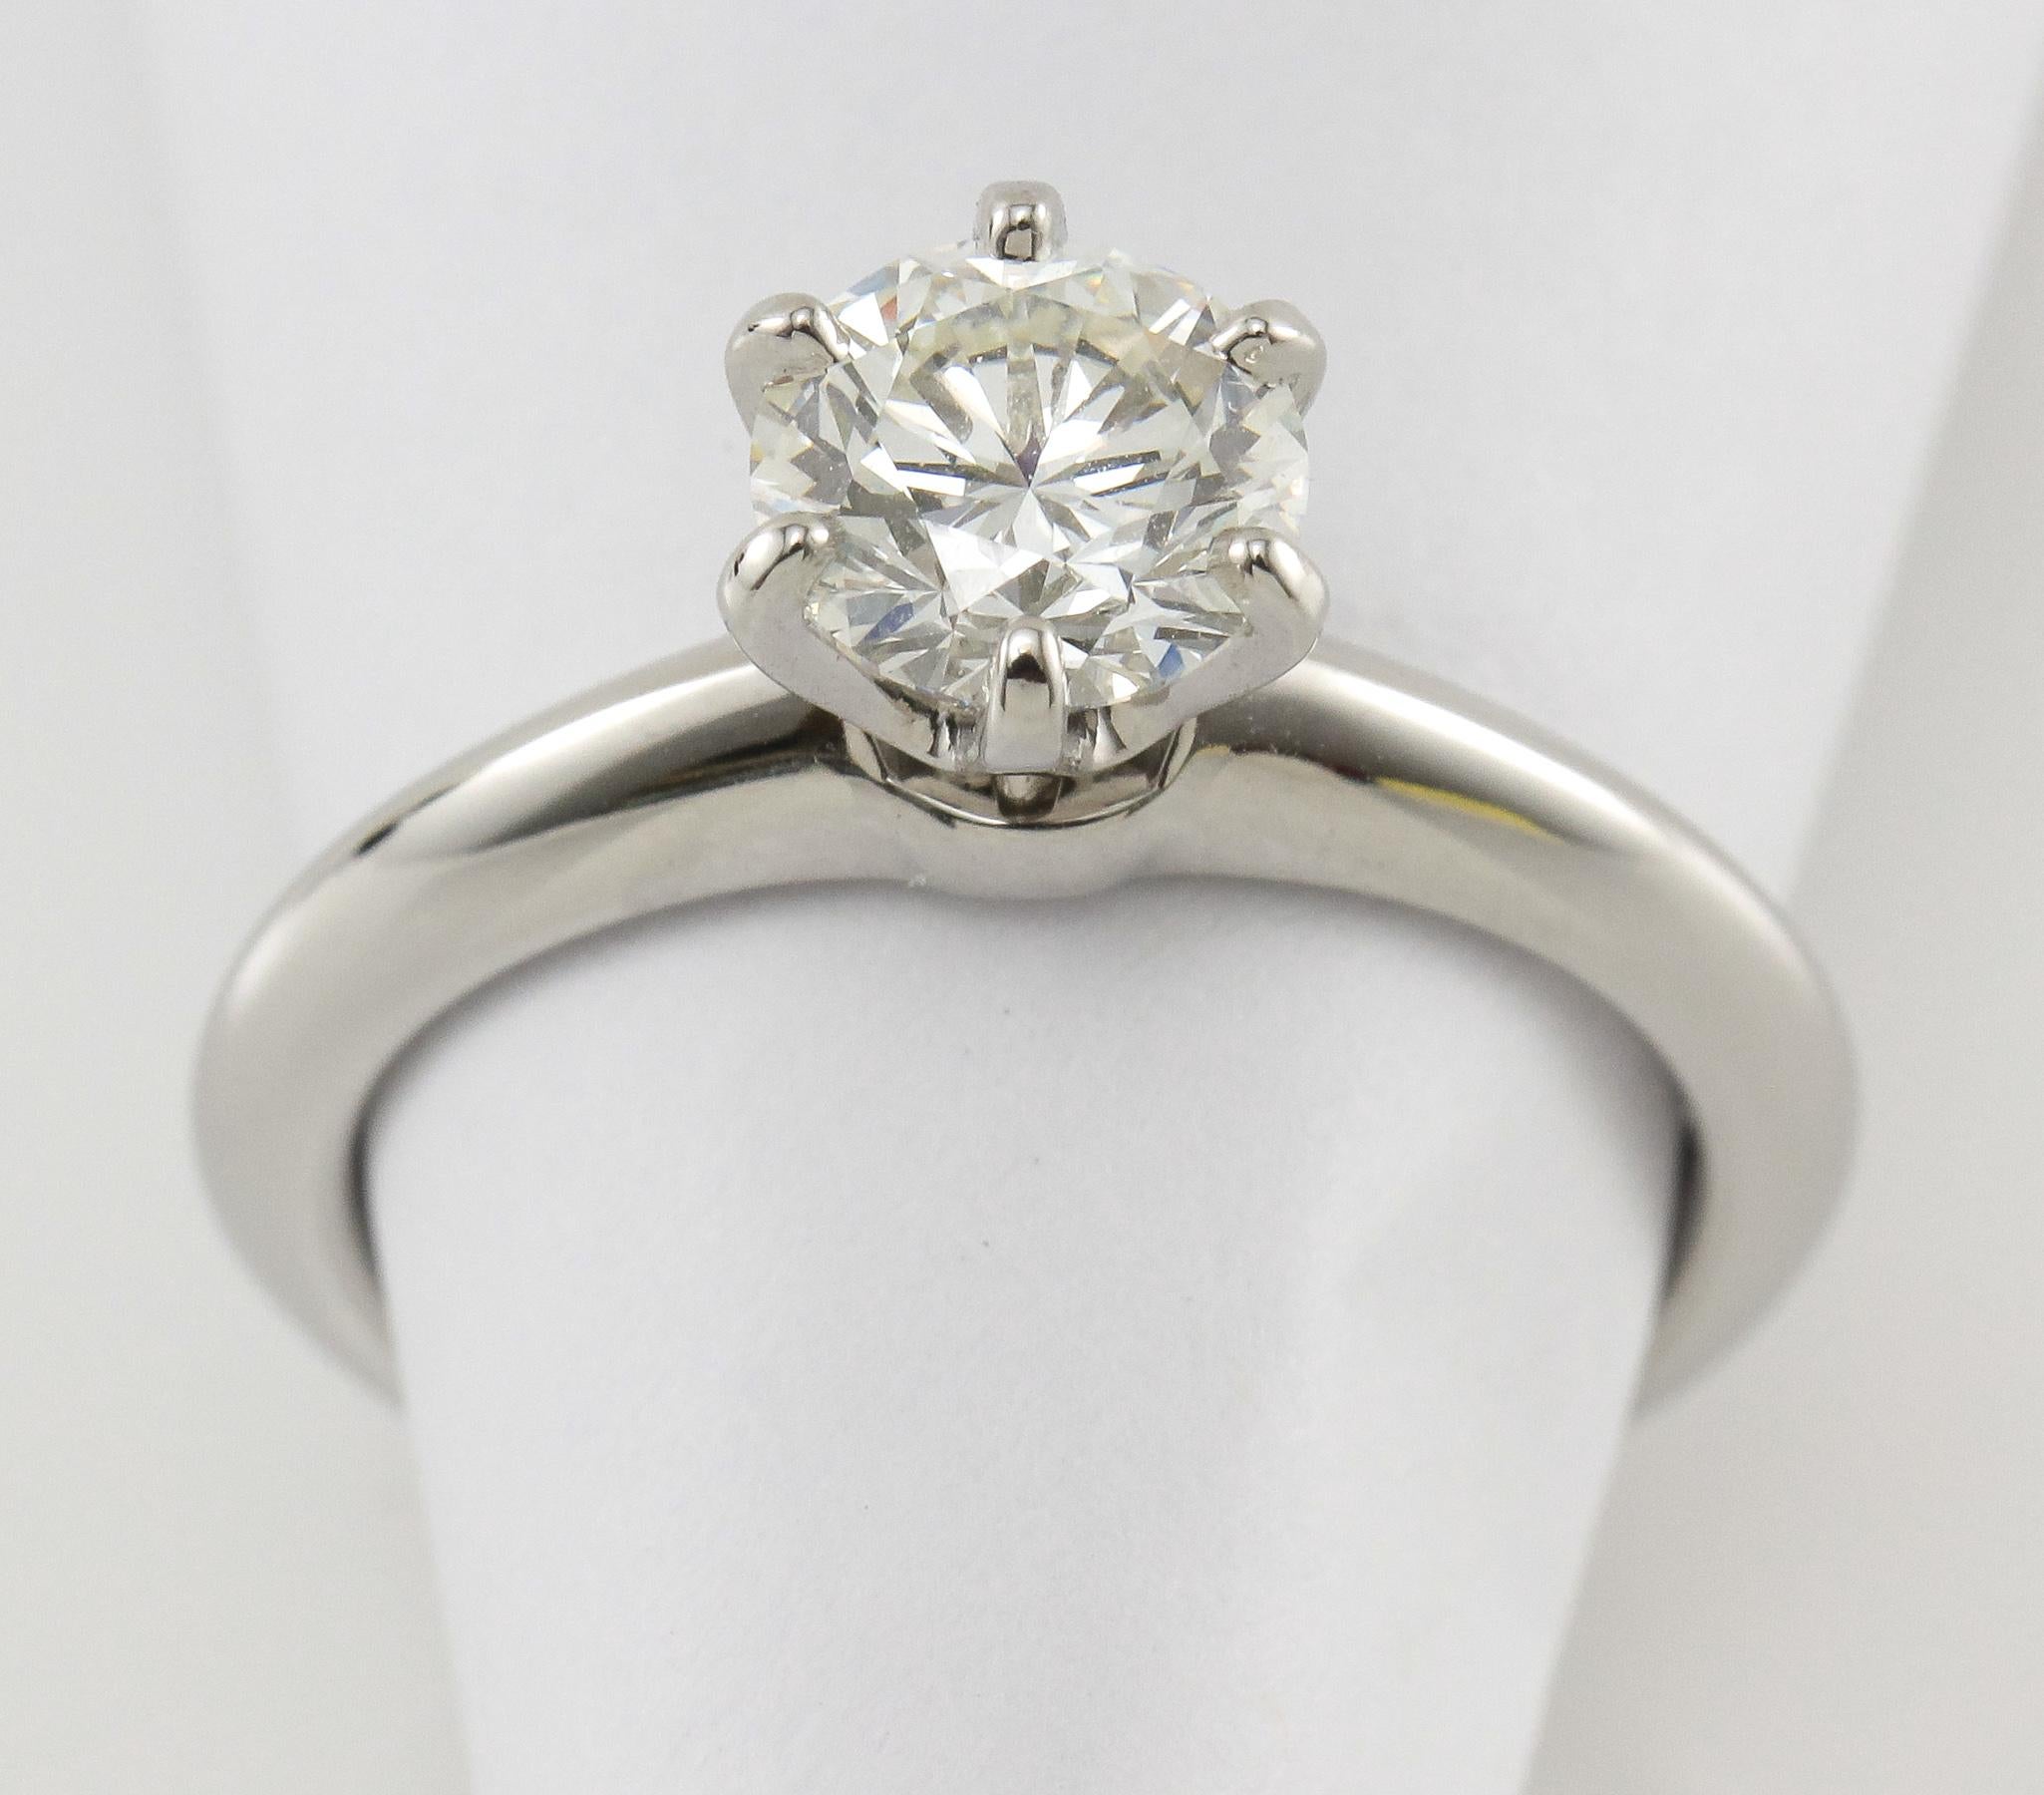 This is the iconic Tiffany & Co. Diamond Solitare Ring with a lustrous 1.02 Carat Round Brilliant Cut Diamond placed in the classic 6-prong Platinum Ring. The lustrous Diamond is I in Color, VS1 in Clarity and includes a GIA Certificate: